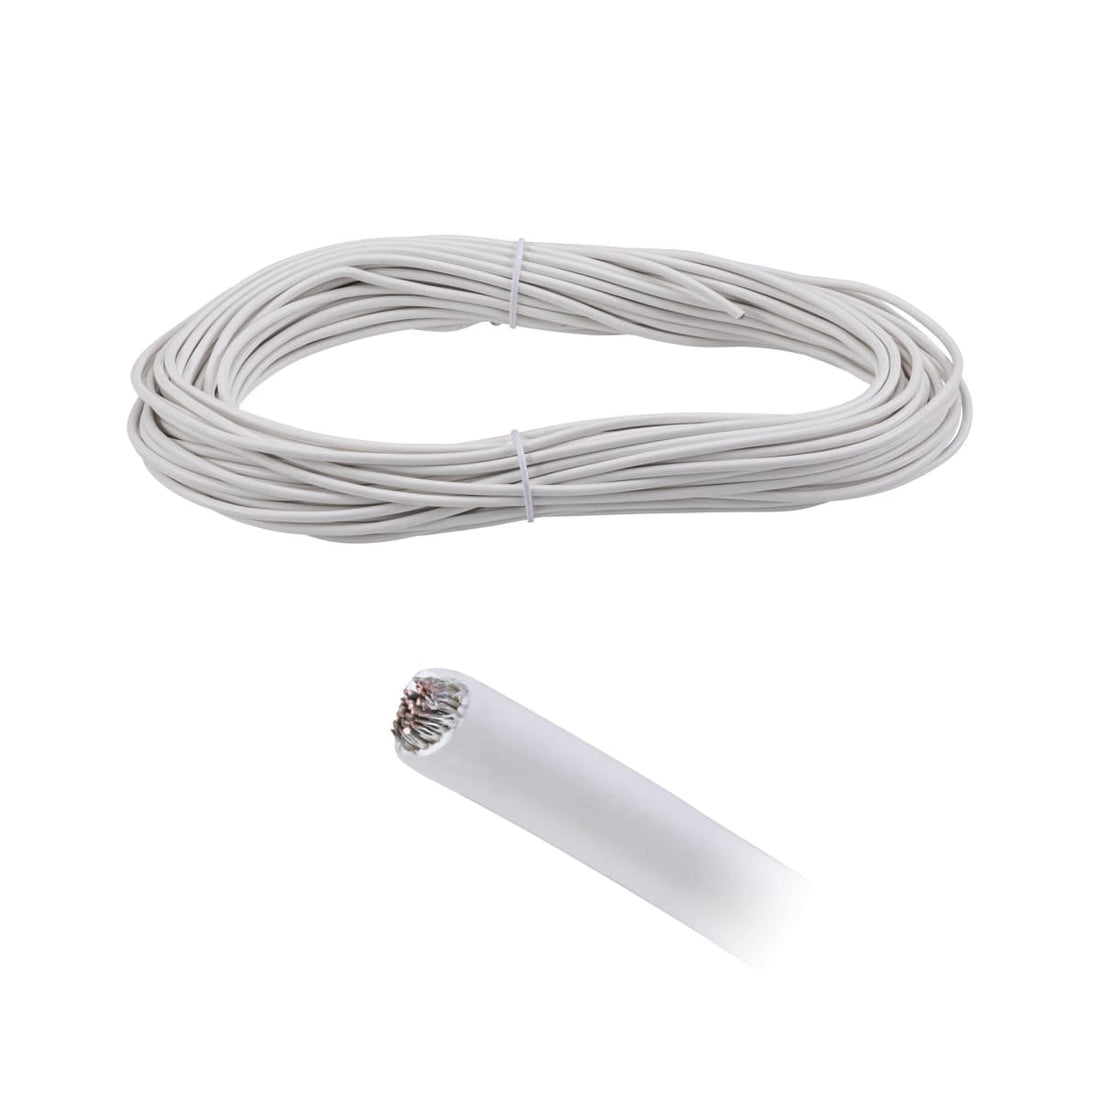 INSULATED CORDUO CABLE 20 M 2.5MM WHITE